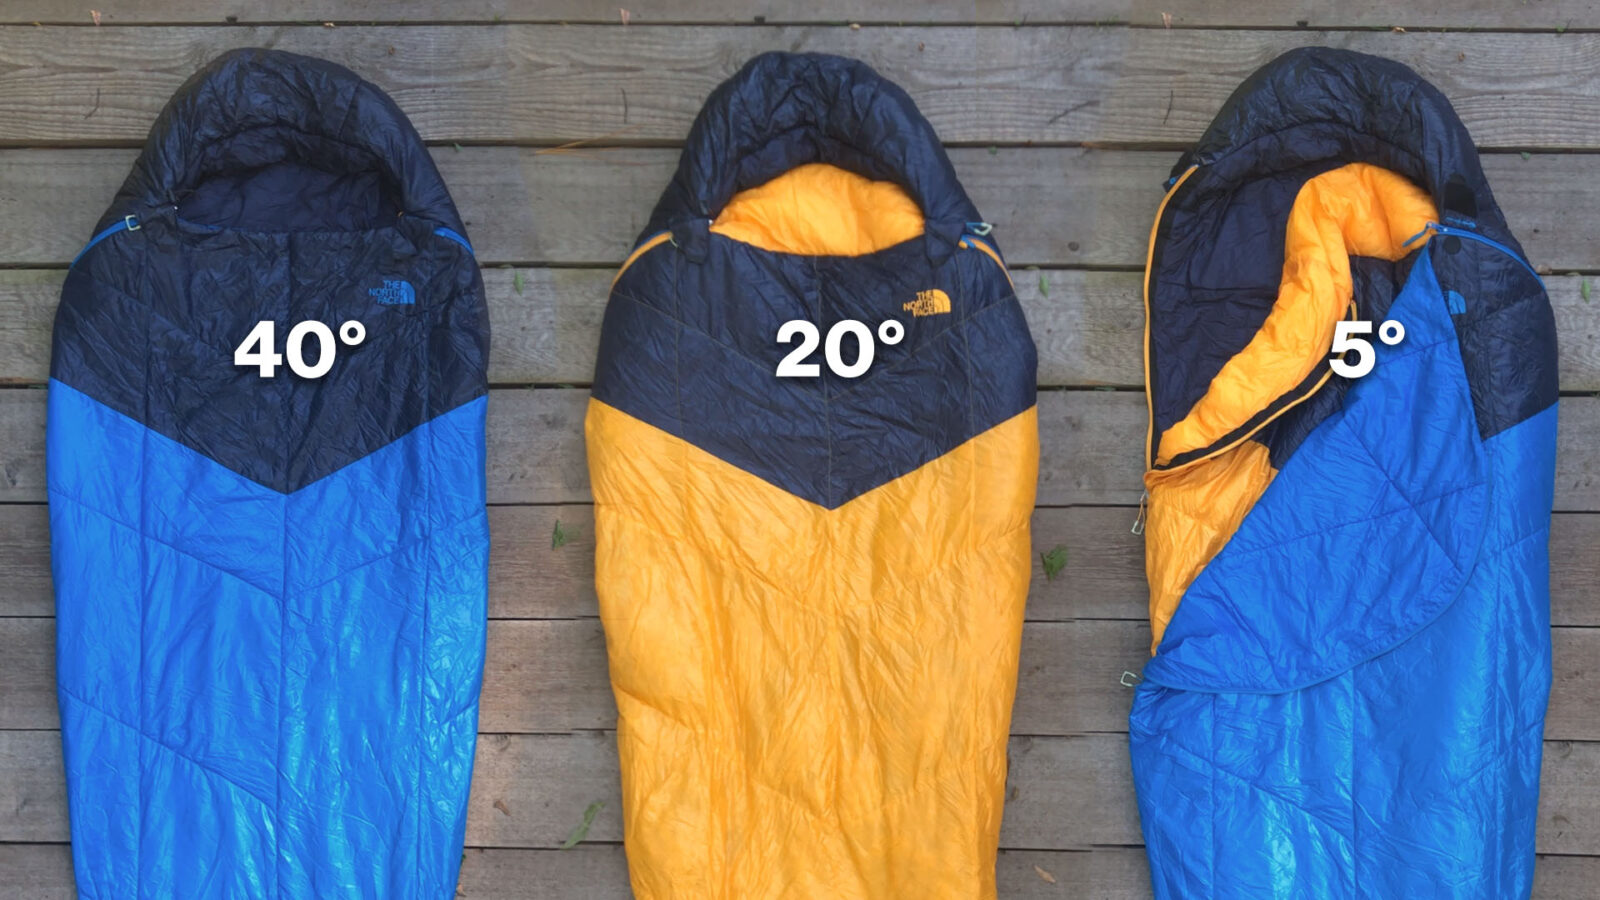 The North Face Dolomite 40 Sleeping Bag  REI Coop